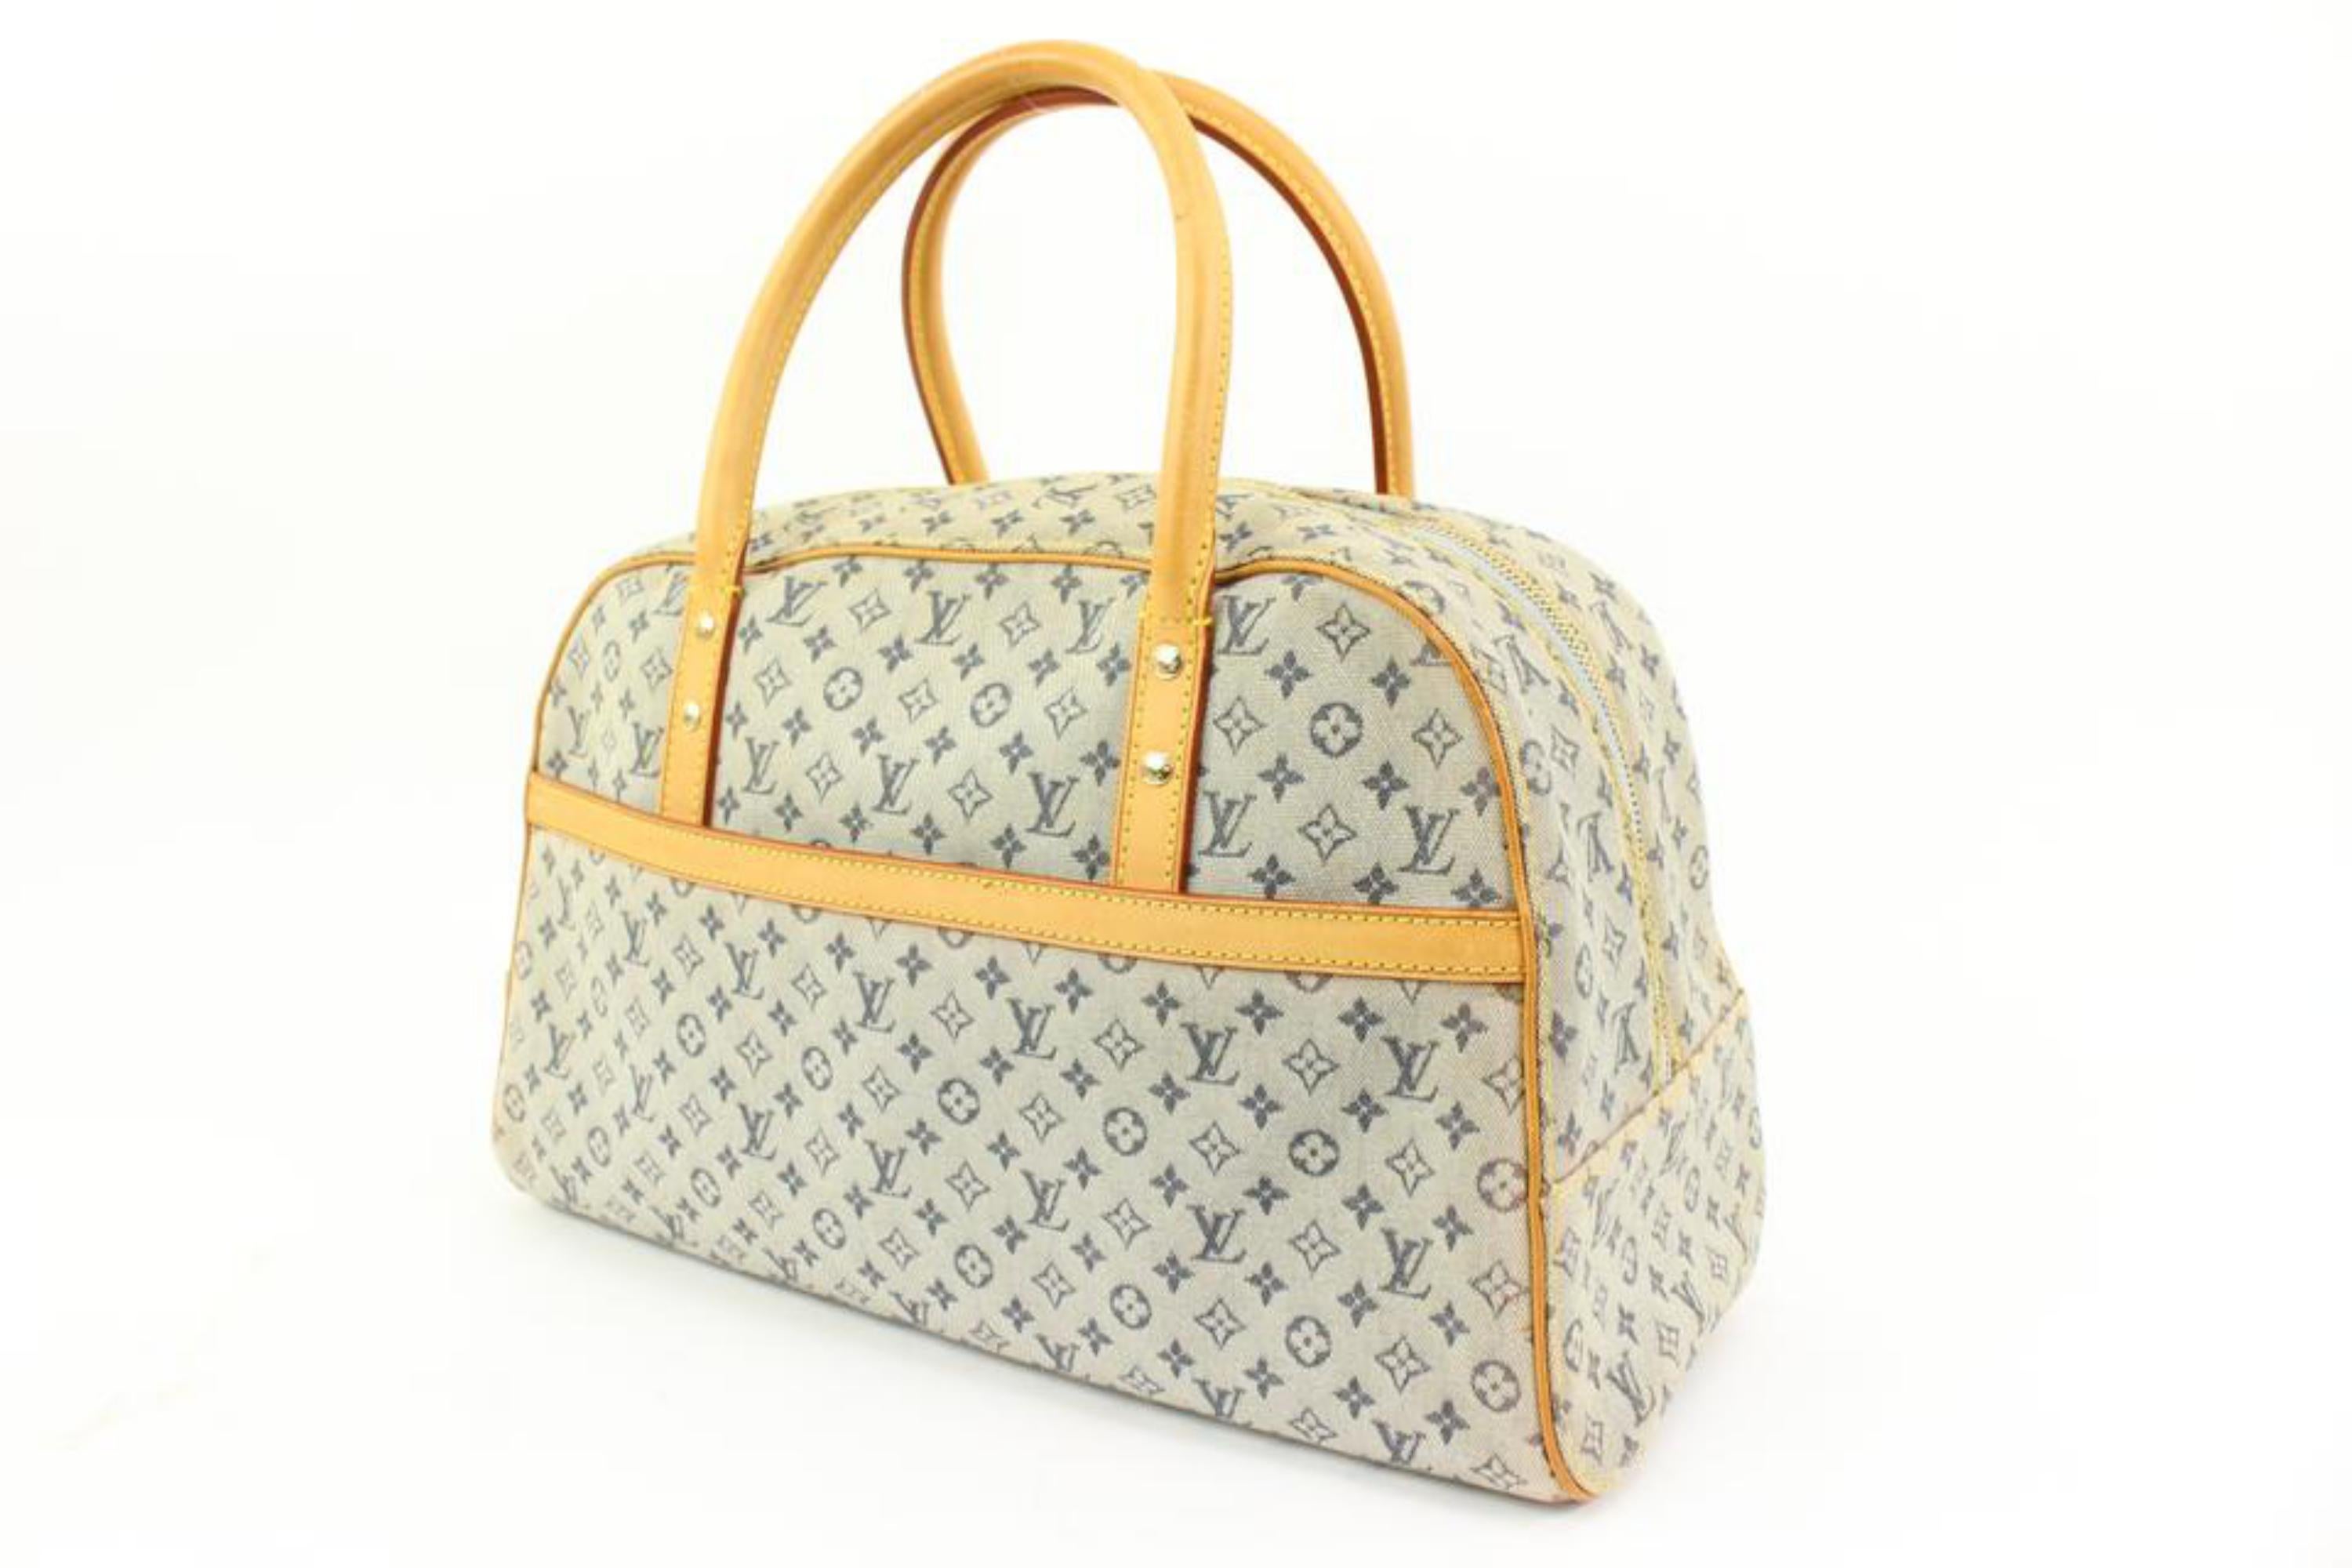 Louis Vuitton Discontinued Navy x Grey Monogram Mini Lin Marie Speedy Bag 65lv315s
Date Code/Serial Number: CA0050
Made In: Spain
Measurements: Length:  14